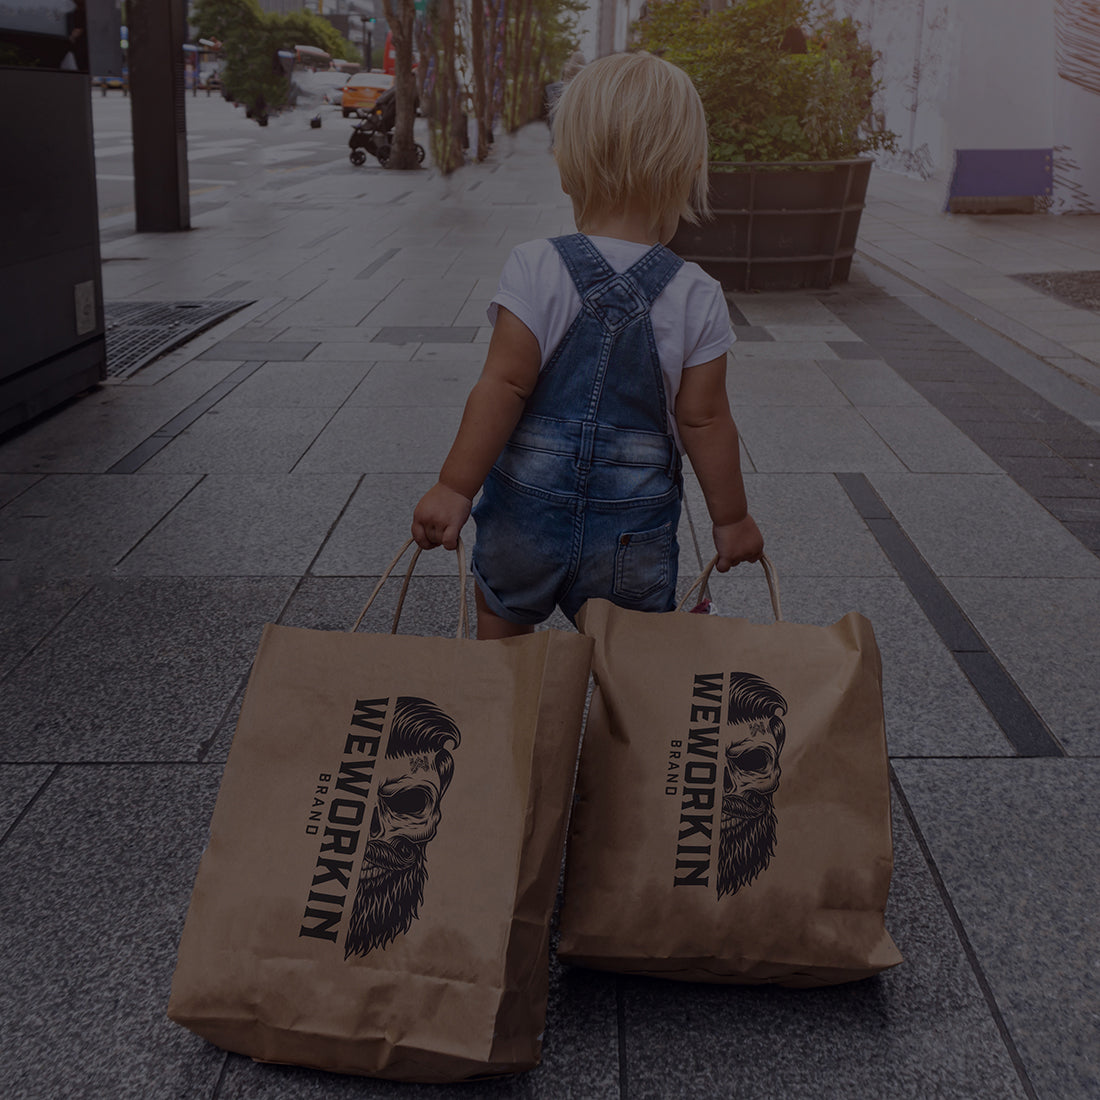 Toddler in jean overalls dragging 2 large stuffed WEWORKIN shopping bags down a city sidewalk